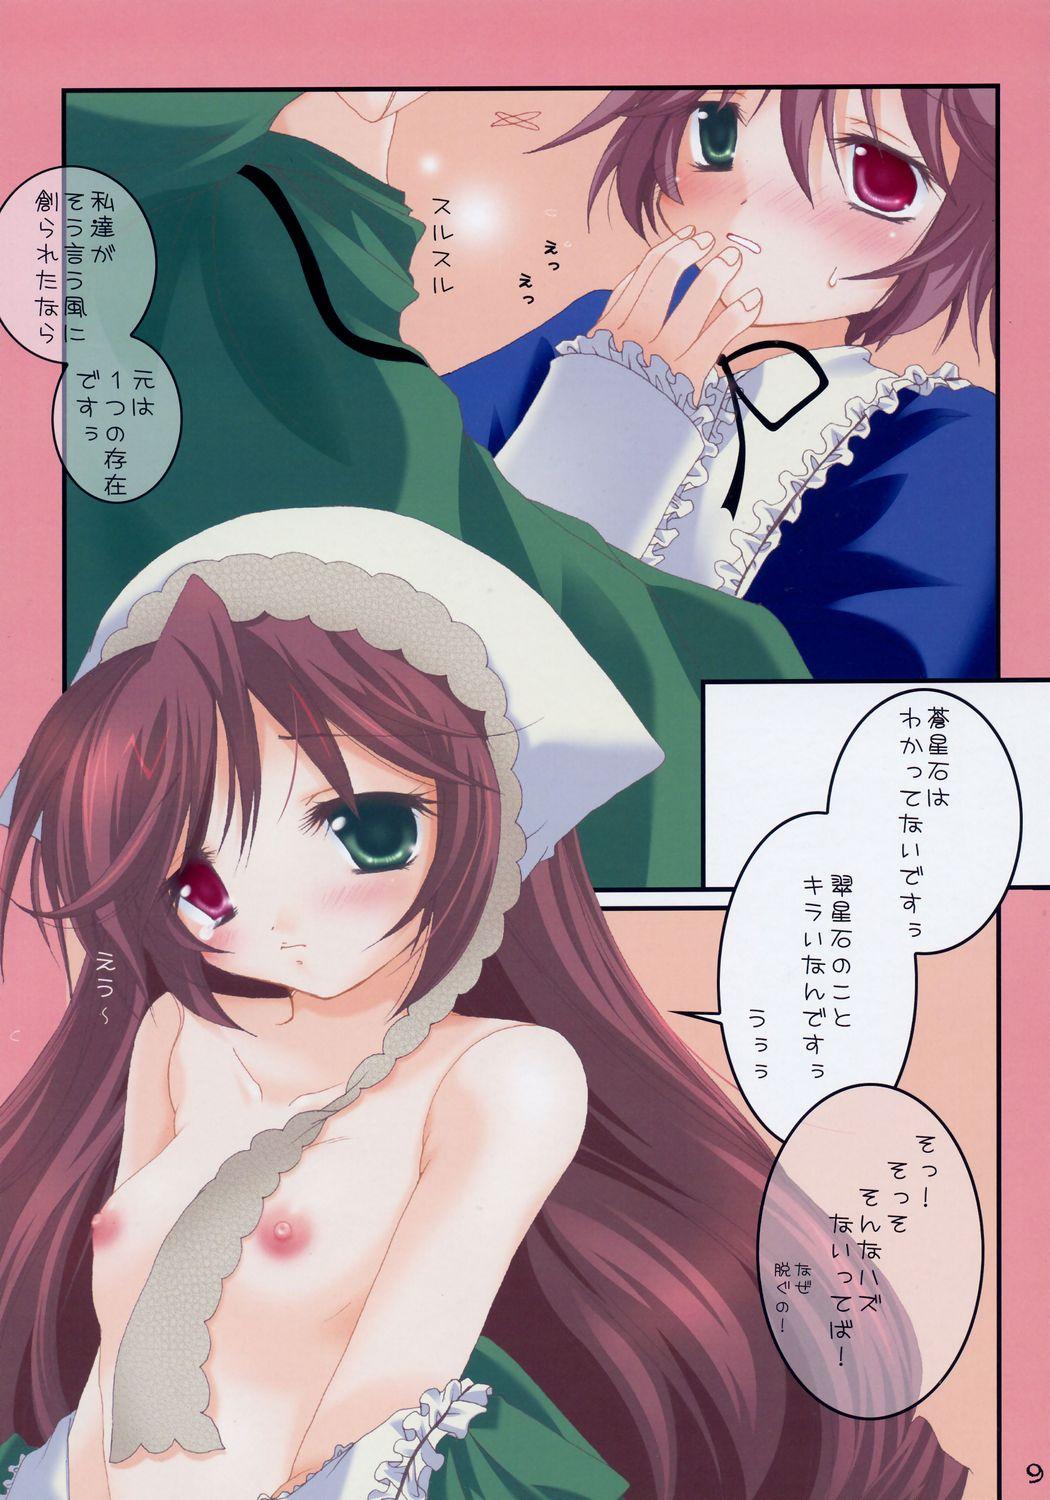 Naturaltits Holy 2 - Rozen maiden Unshaved - Page 8